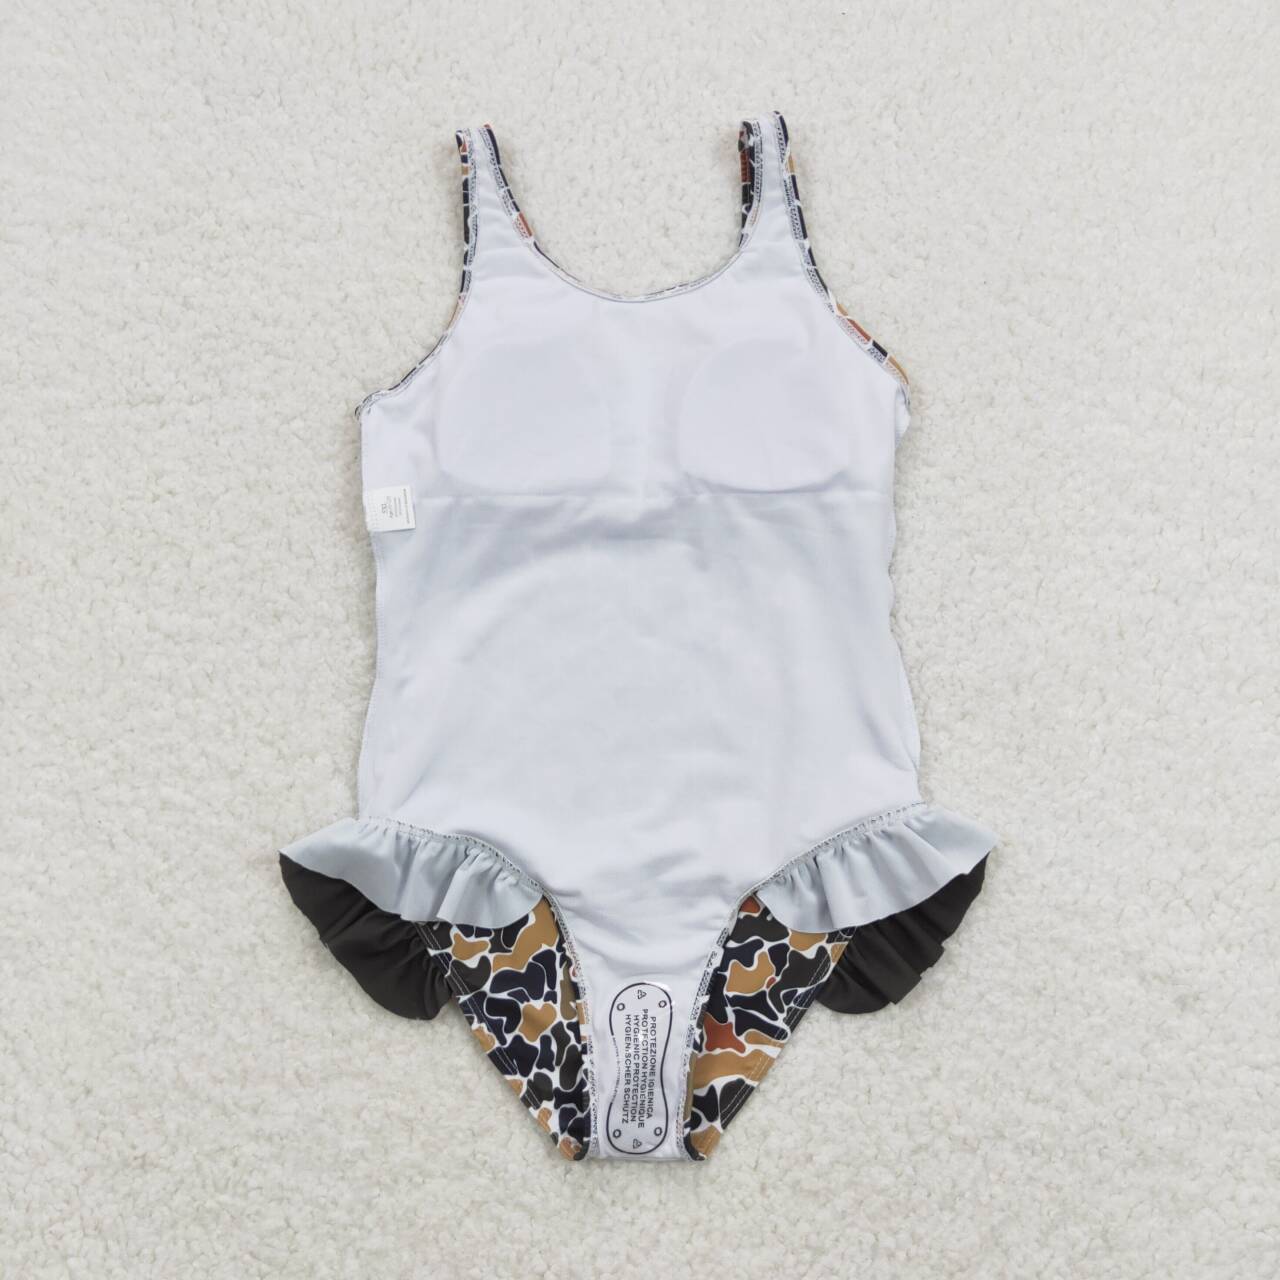 Camo Print Summer Swimsuits Sibling Clothes